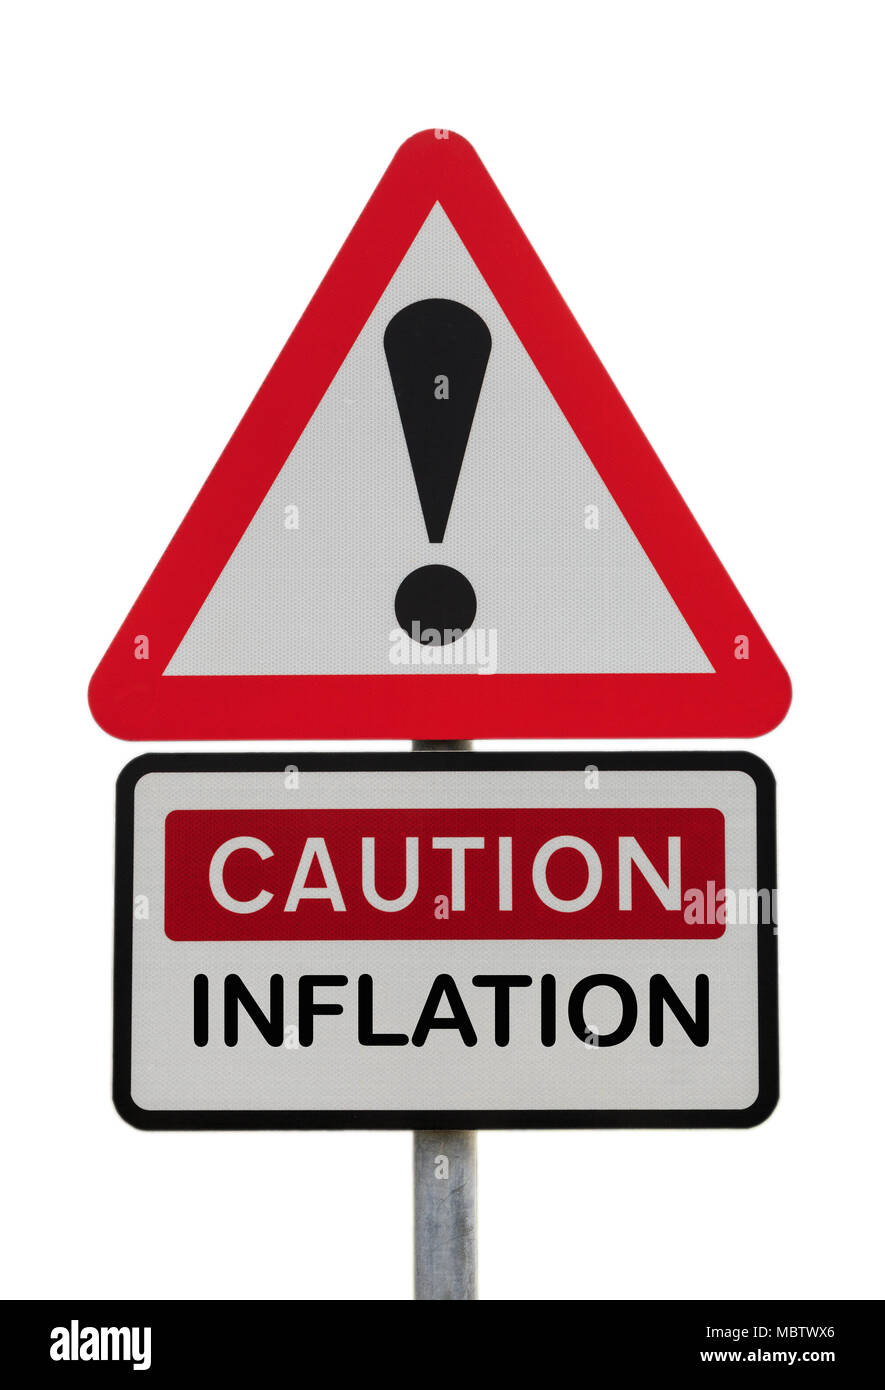 Triangular sign warning Caution Inflation with exclamation mark to illustrate financial future concept. UK, Britain, Europe Stock Photo